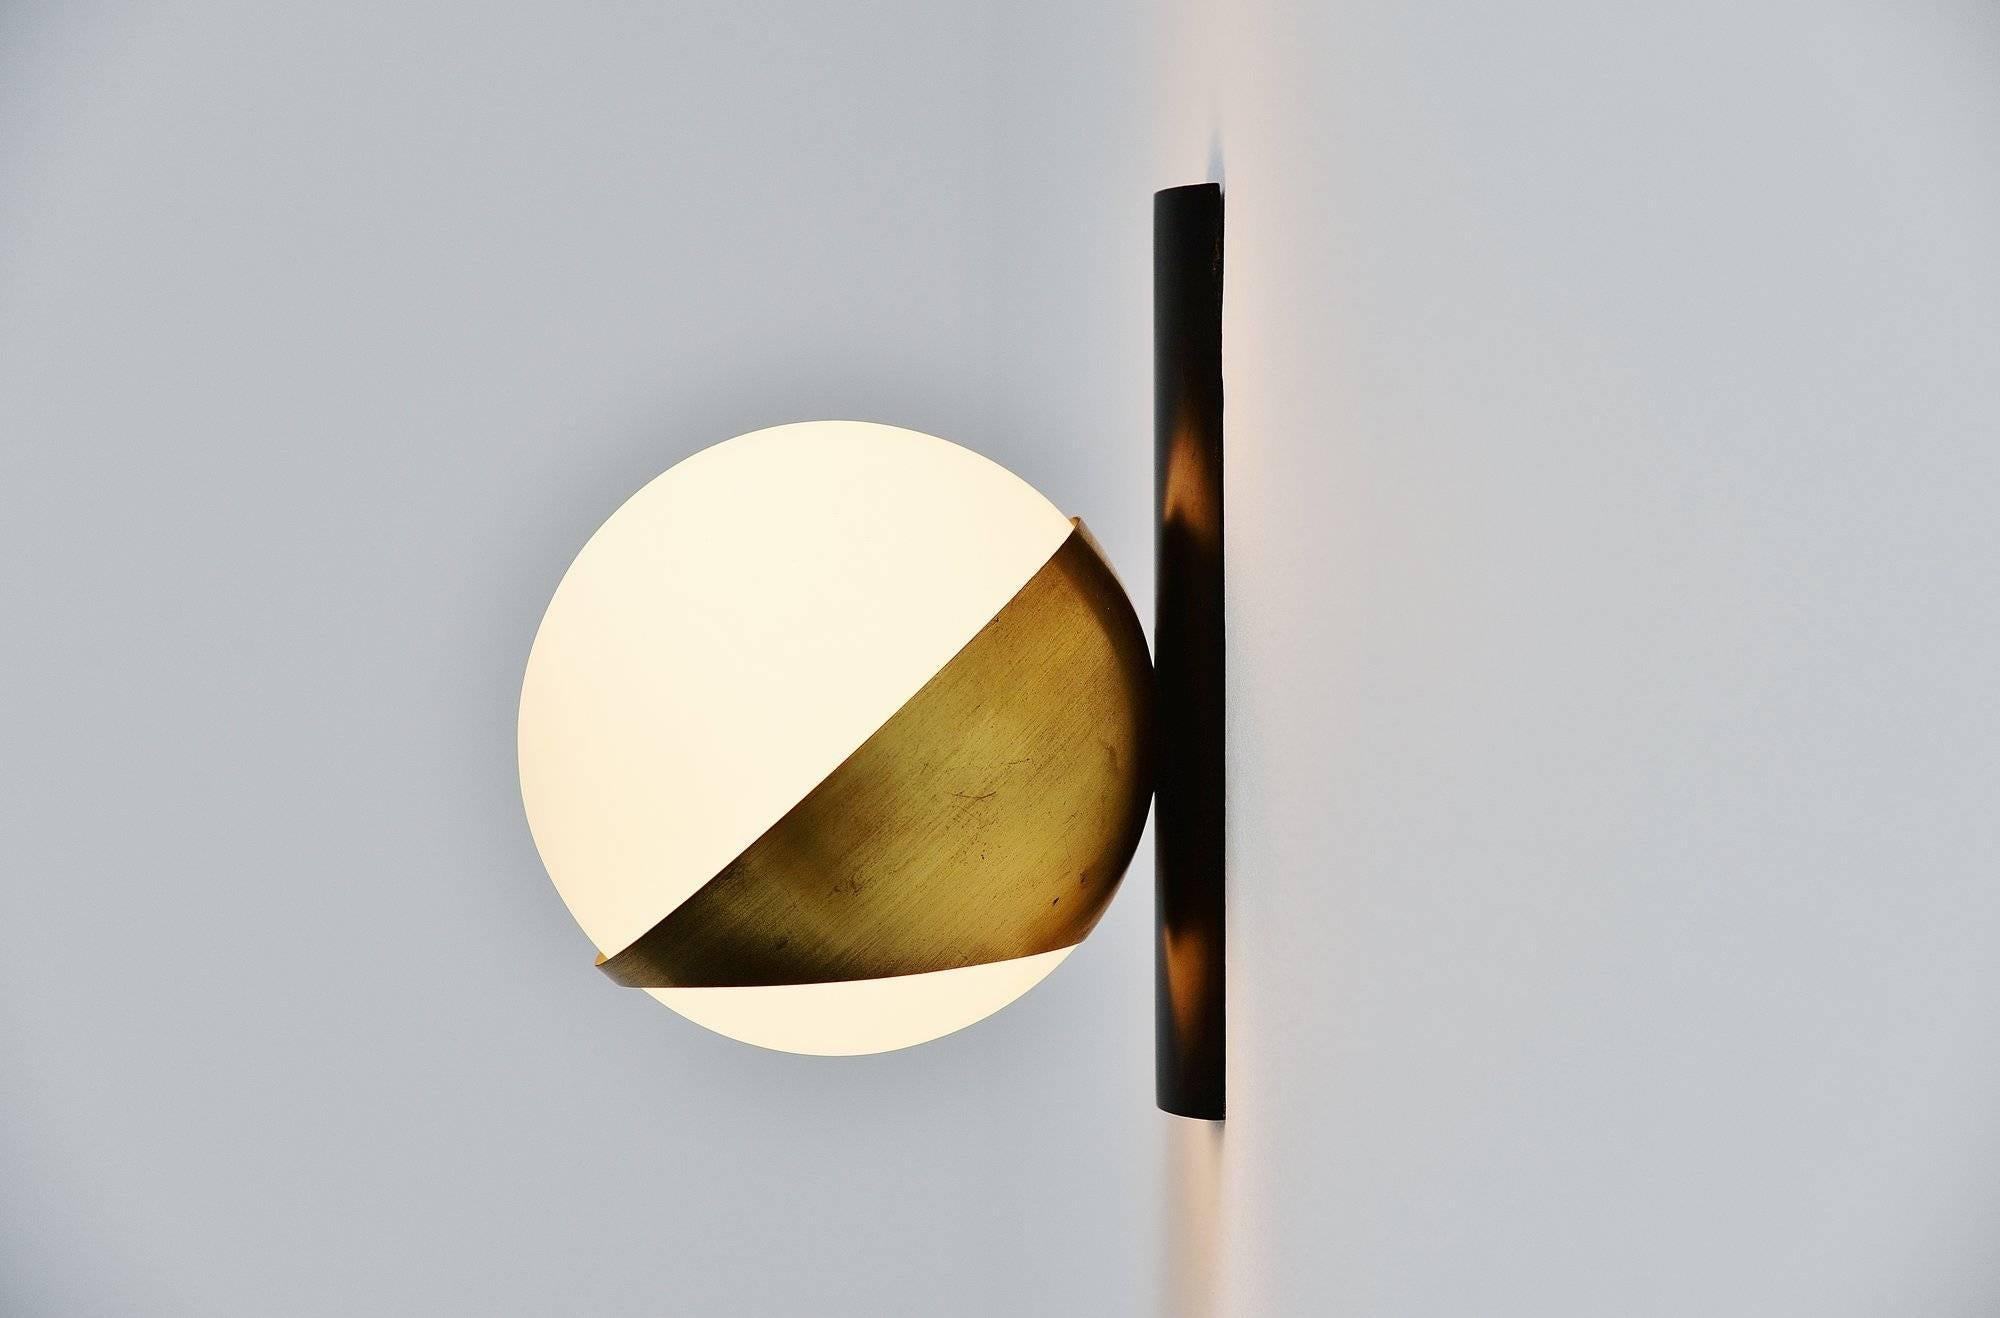 Nice modernist wall sconce designed and manufactured by Stilnovo, Italy, 1950. This lamp has a black wall plate and a brass sphere holder. The white frosted glass shade gives nice warm light when lit. The lamp is in good original condition with a